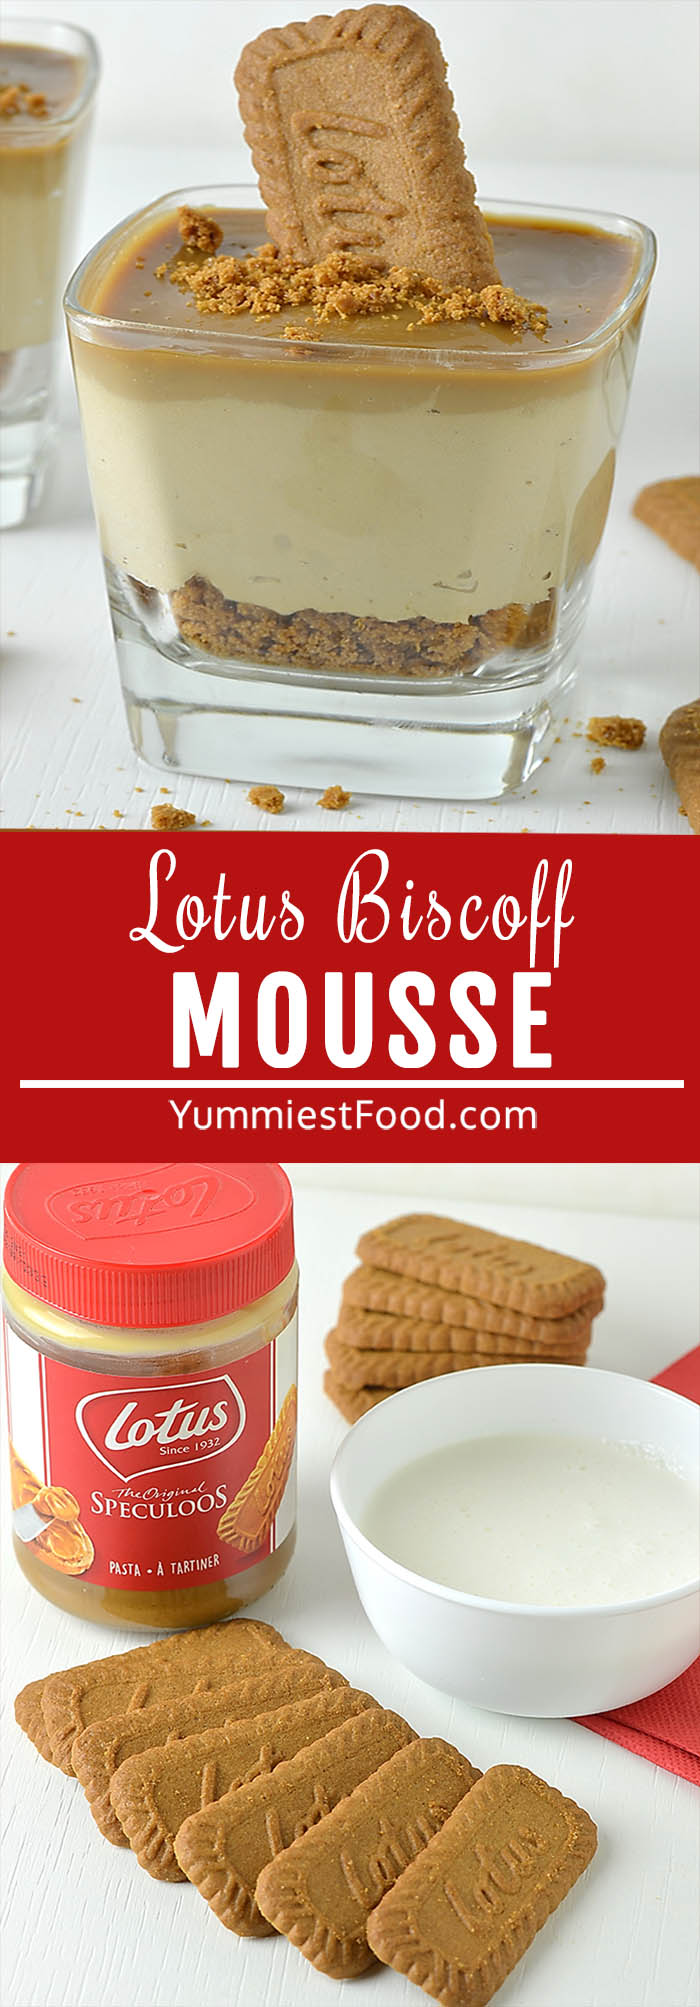 Easy, rich and decadent dessert with 3 ingredients a Lotus Biscuit base, creamy Lotus Biscoff mousse and Lotus Biscoff spread! Elegant dessert for any special occasion!